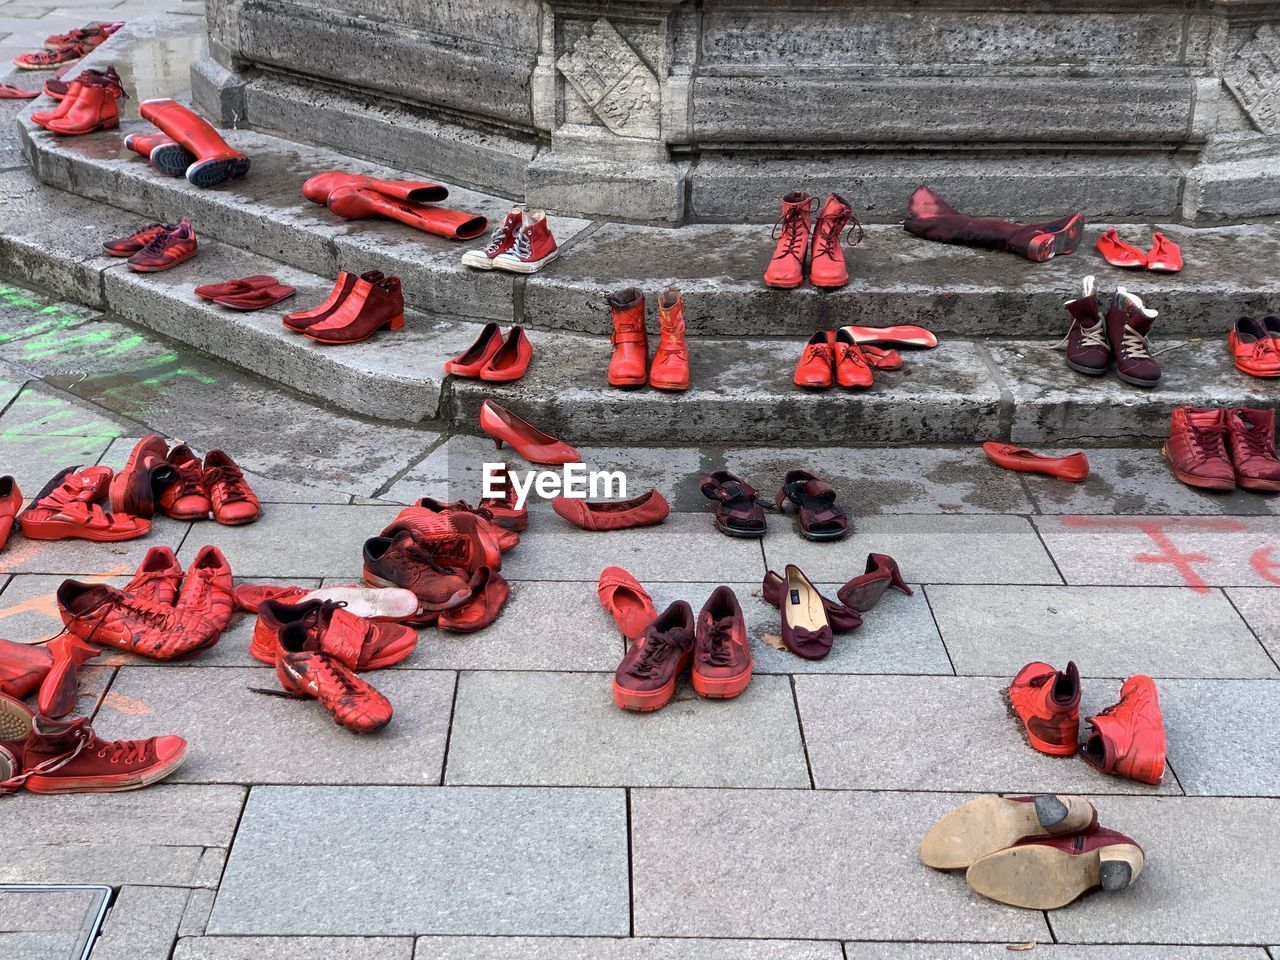 High angle view of red shoes in public on footpath in city, artistic